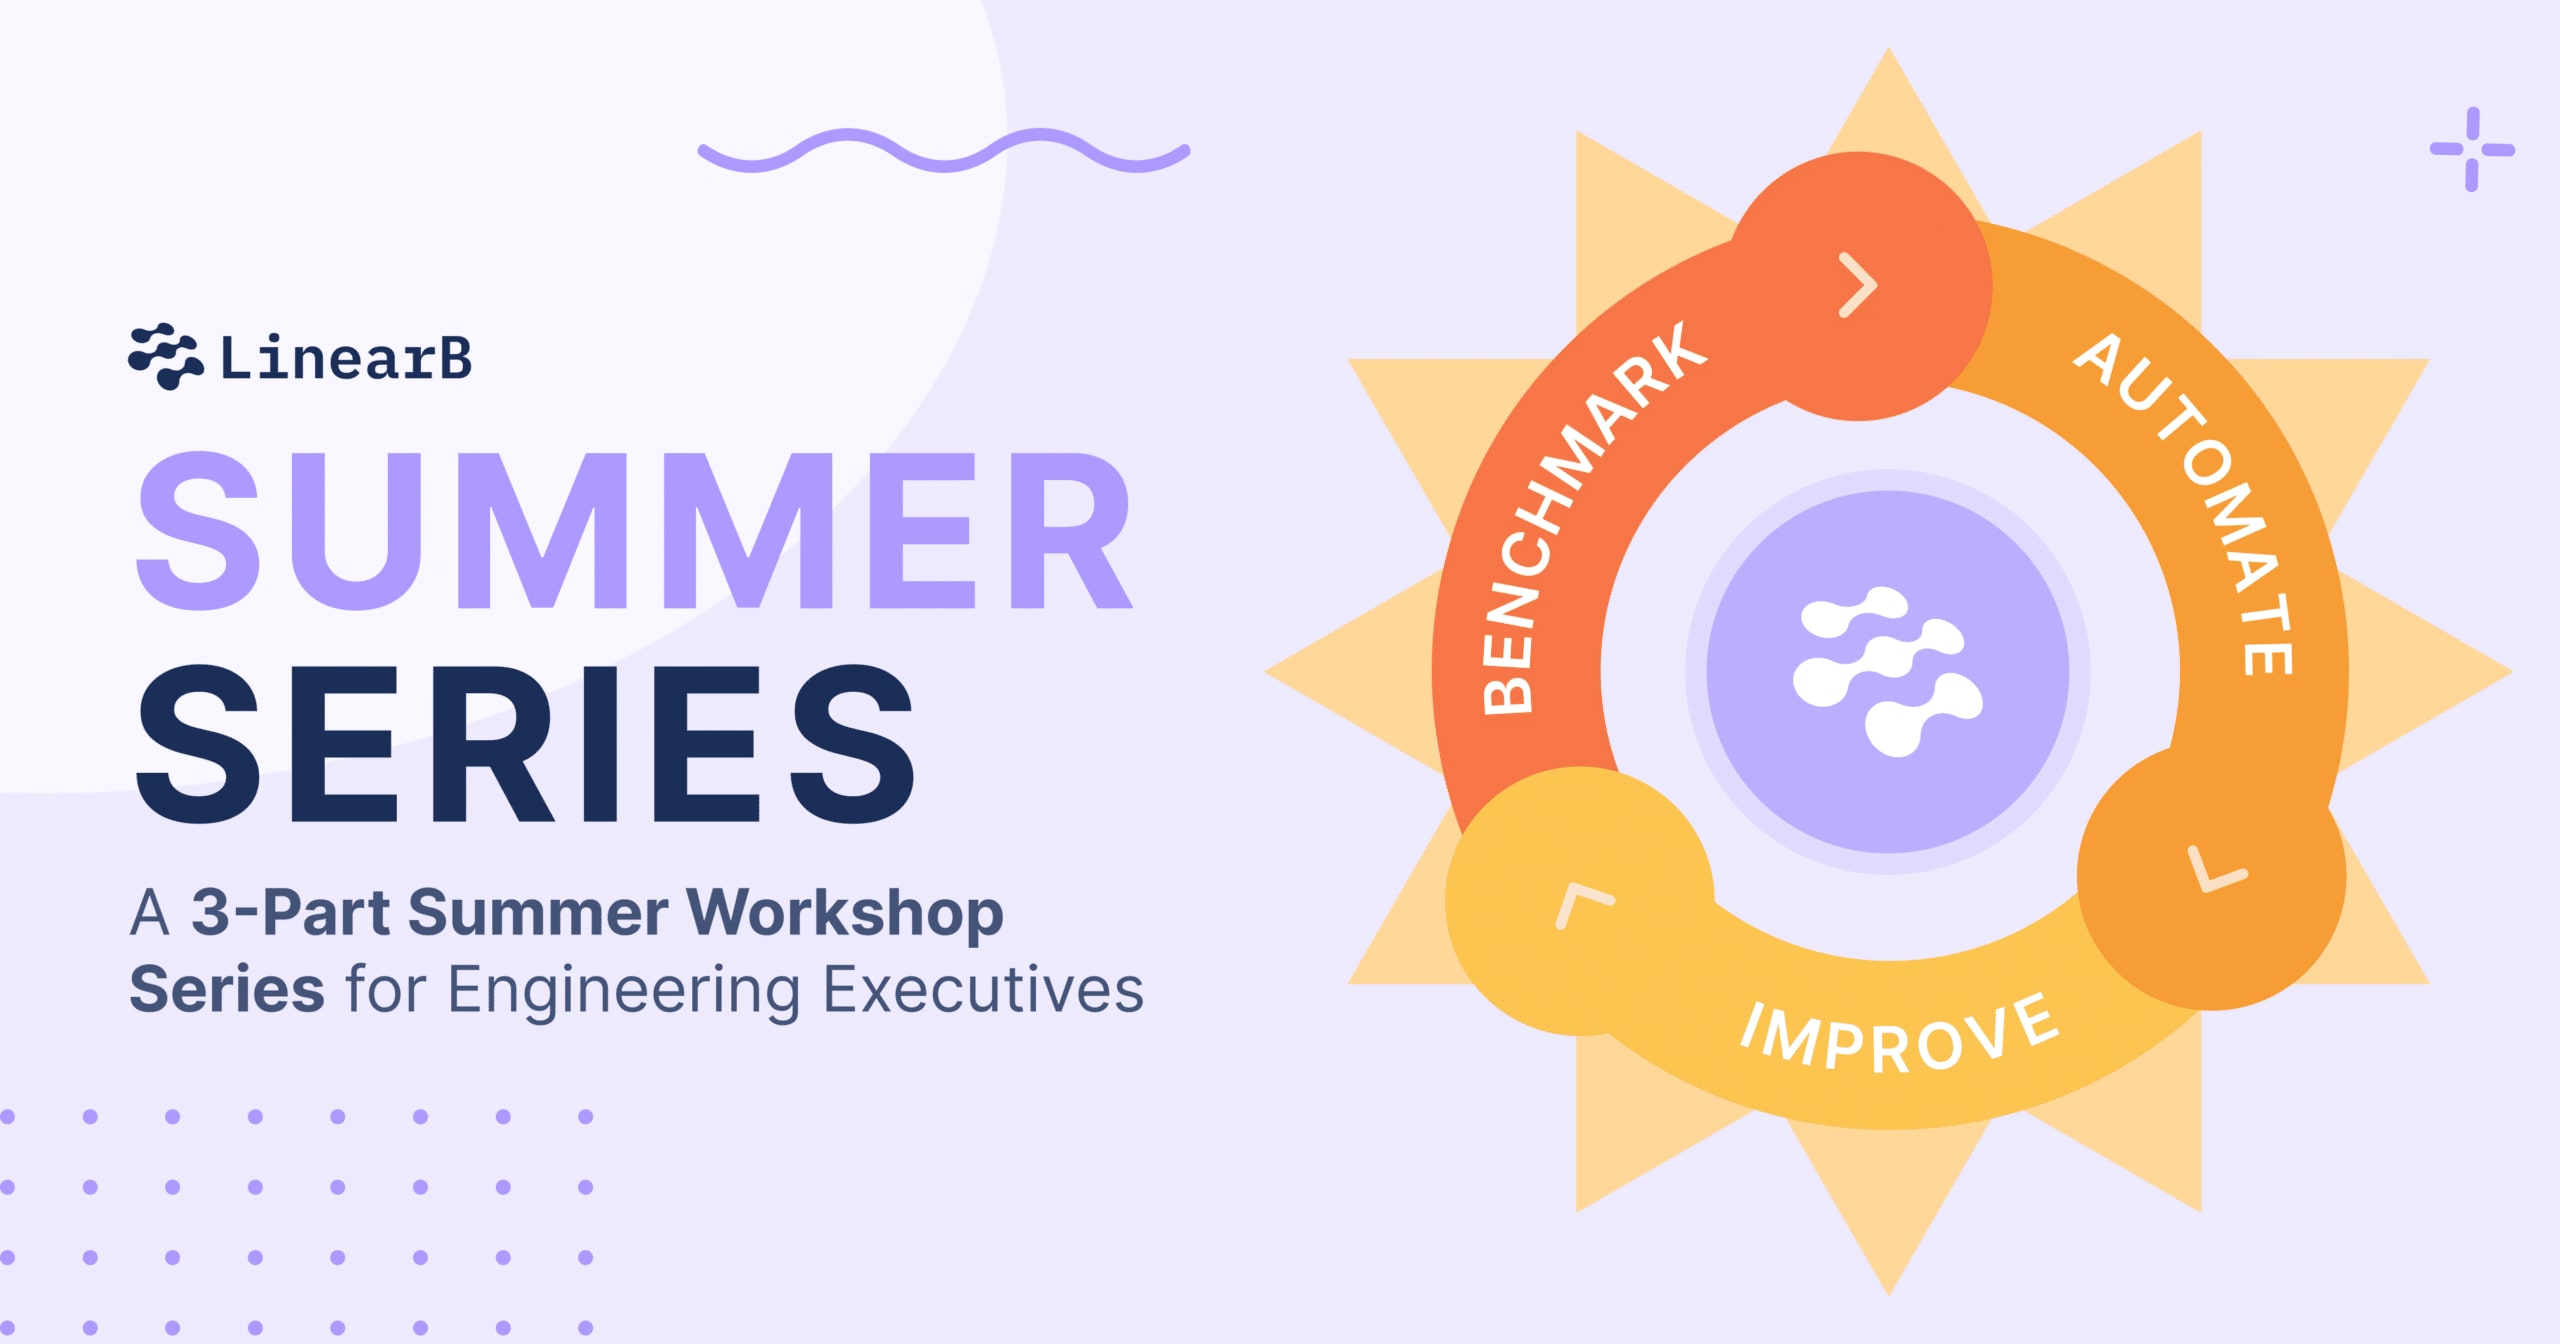 Summer Series. A 3-Part Summer Workshop Series for Engineering Executives